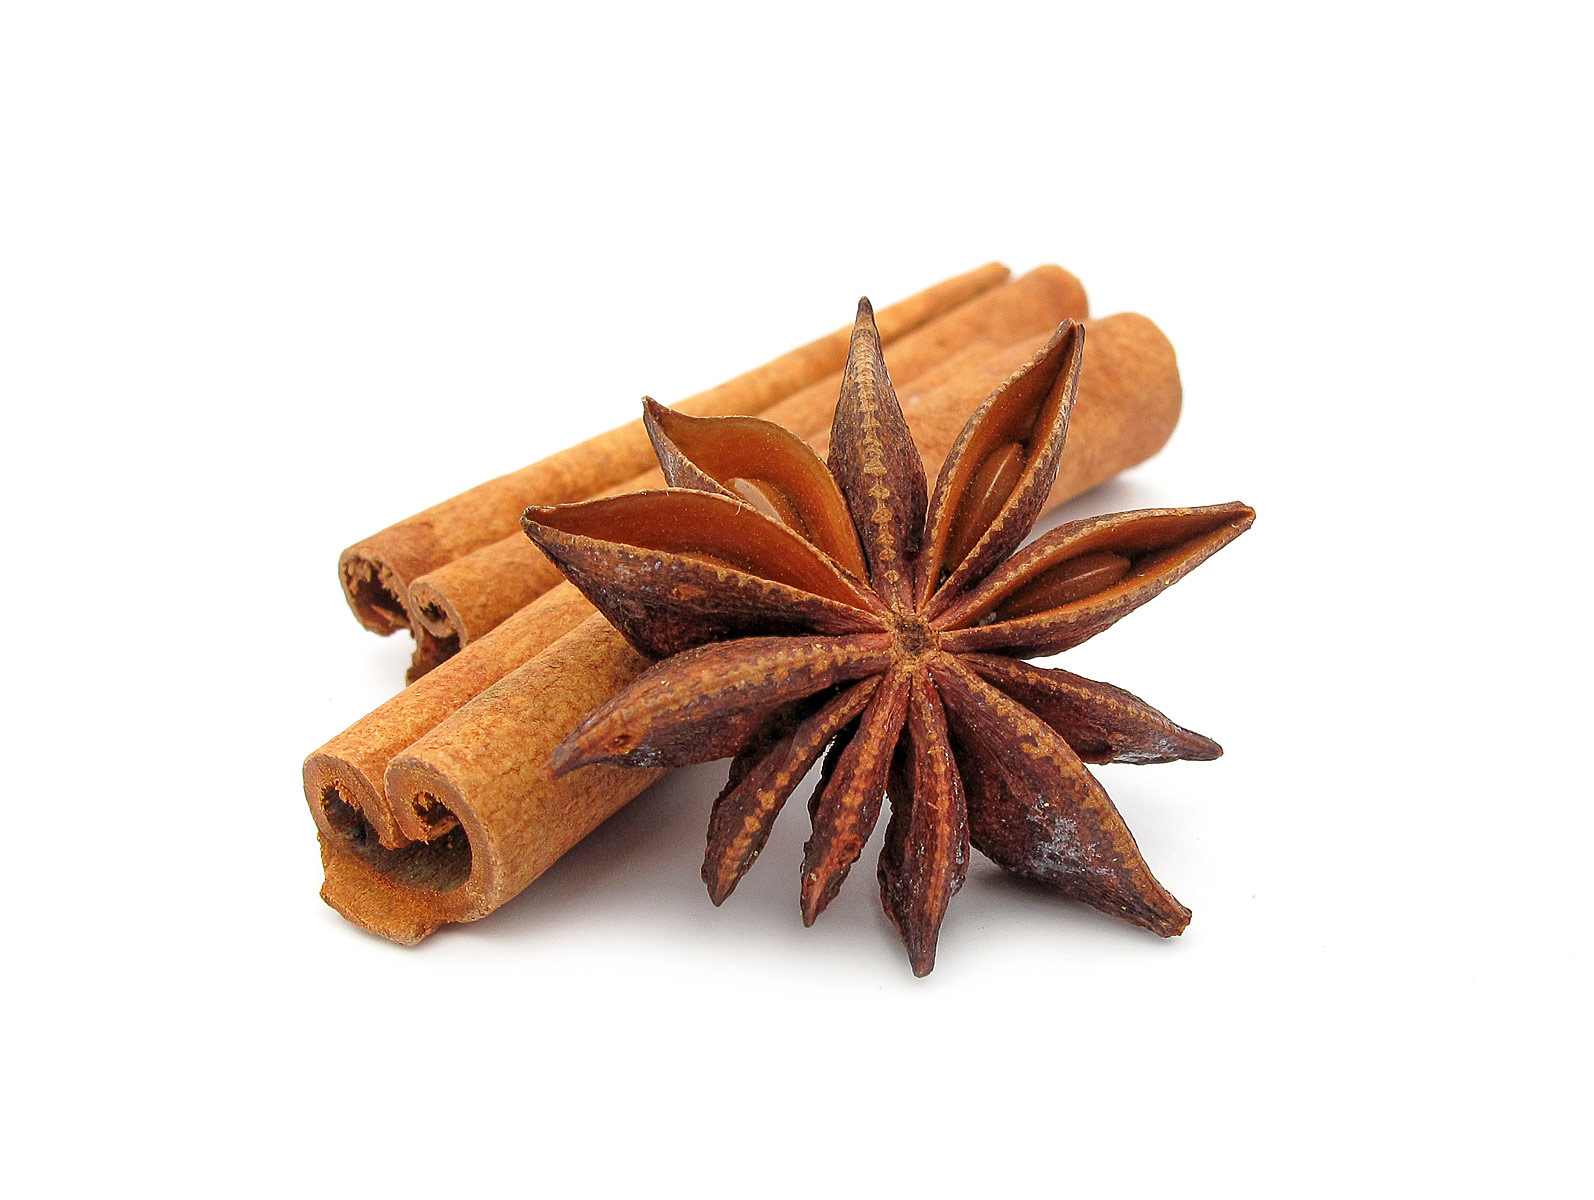 cinnamon sticks and star anise on white background. 